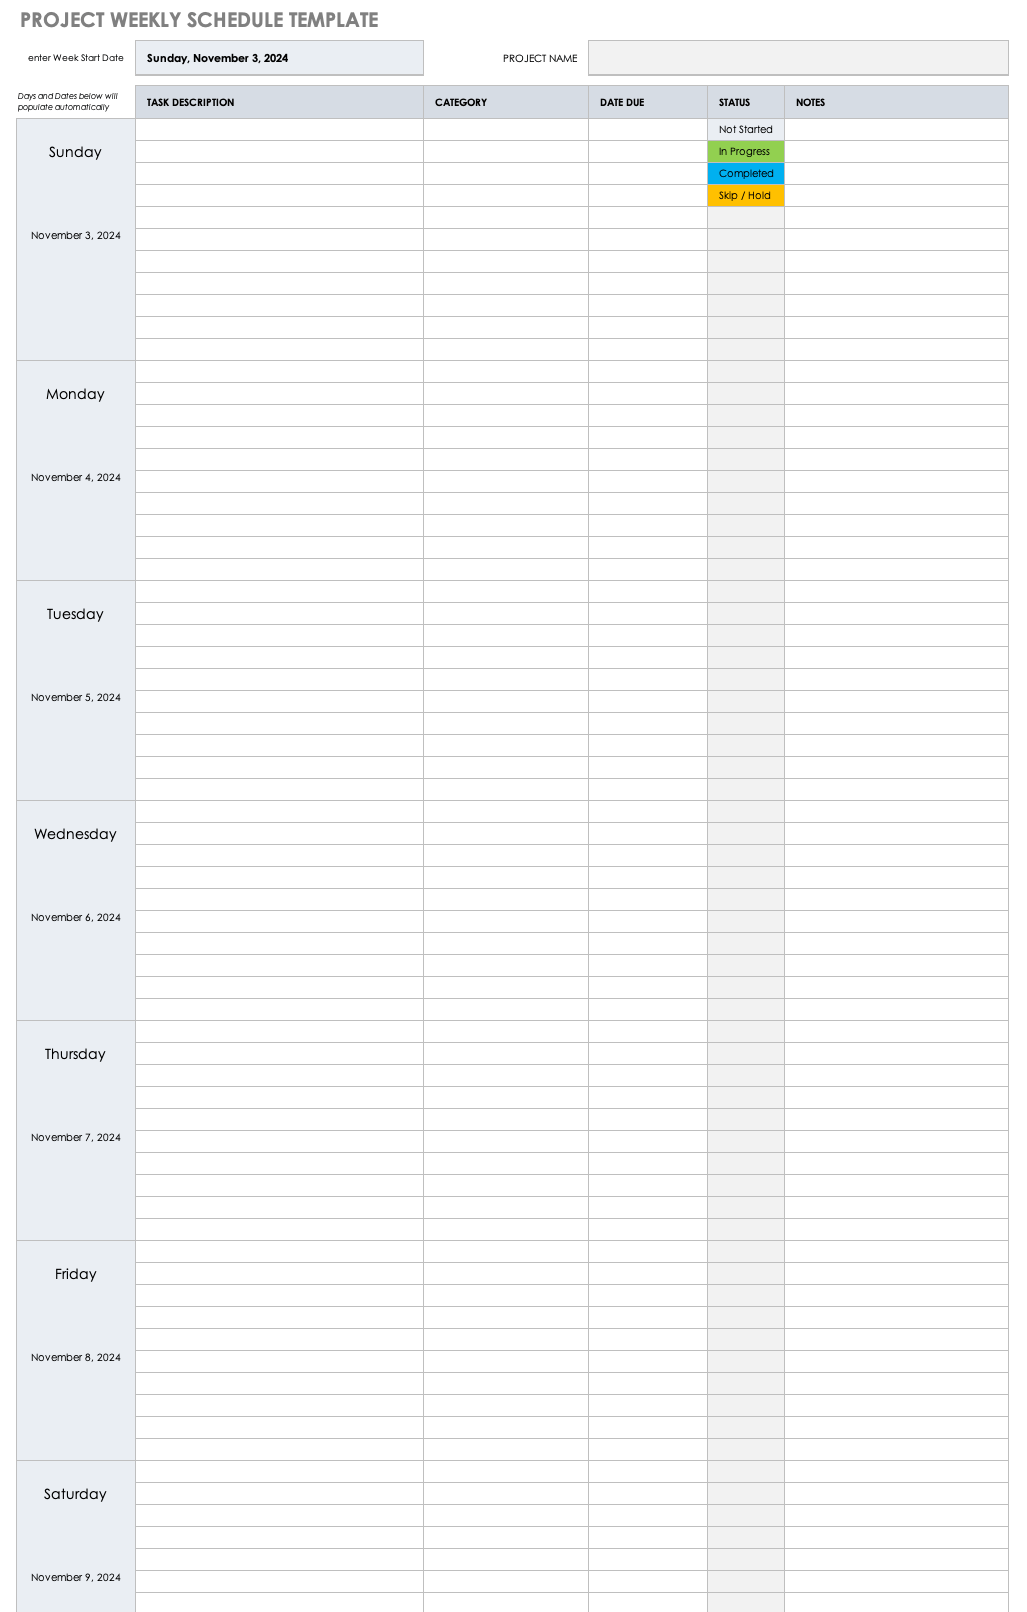 Project Weekly Schedule Template